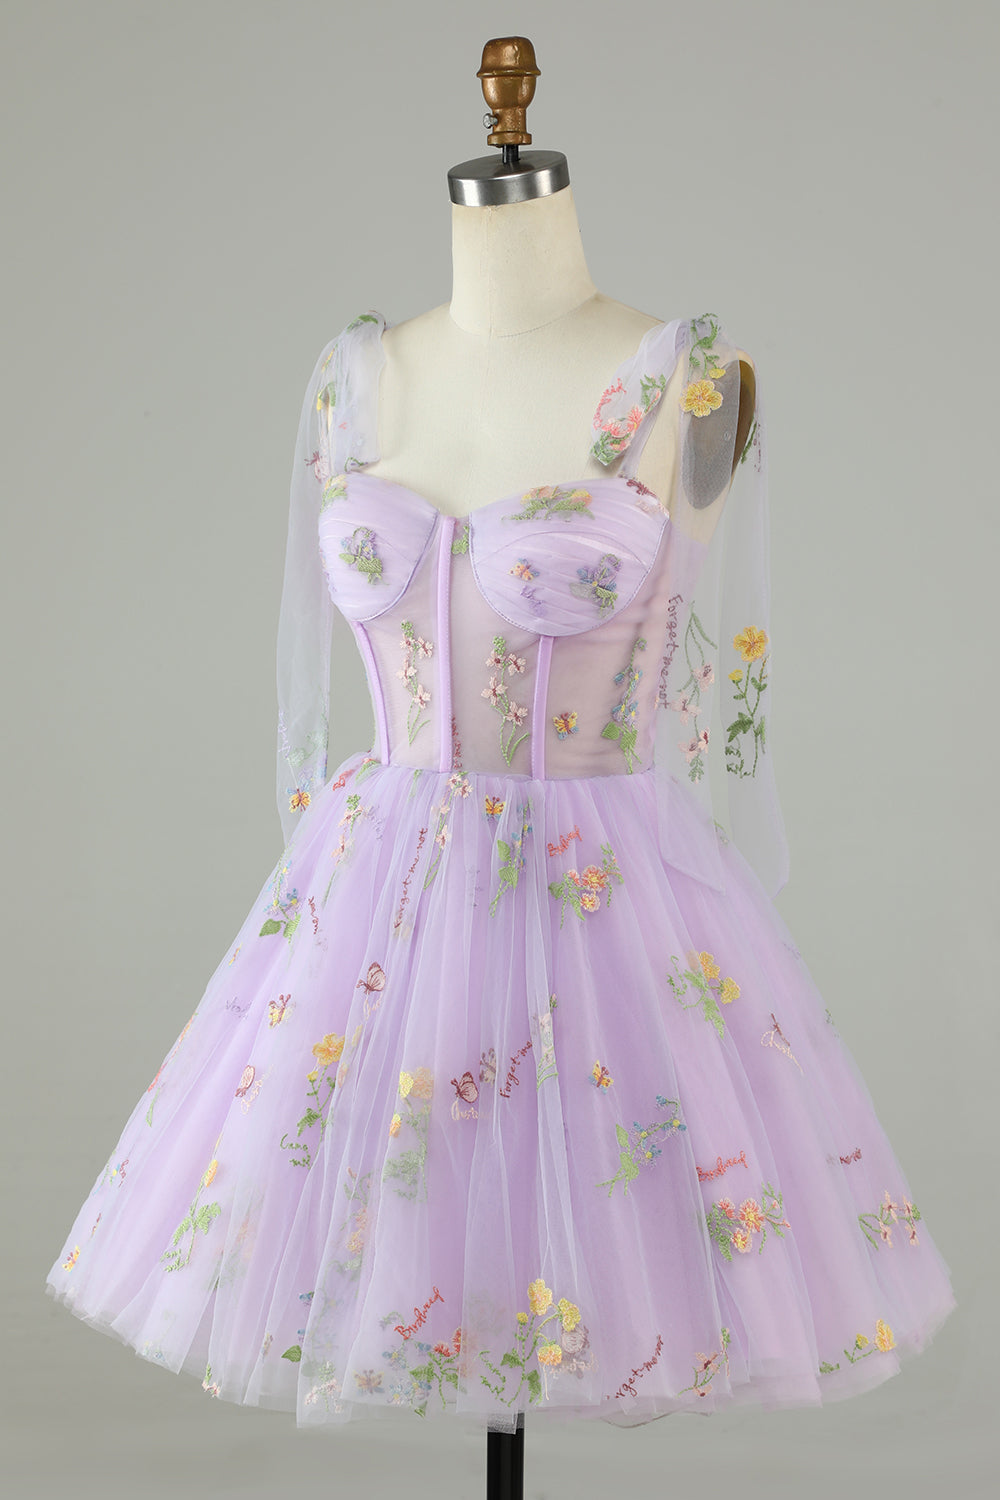 Spaghetti Straps Lavender Tulle Short Homecoming Dress with Embroidery